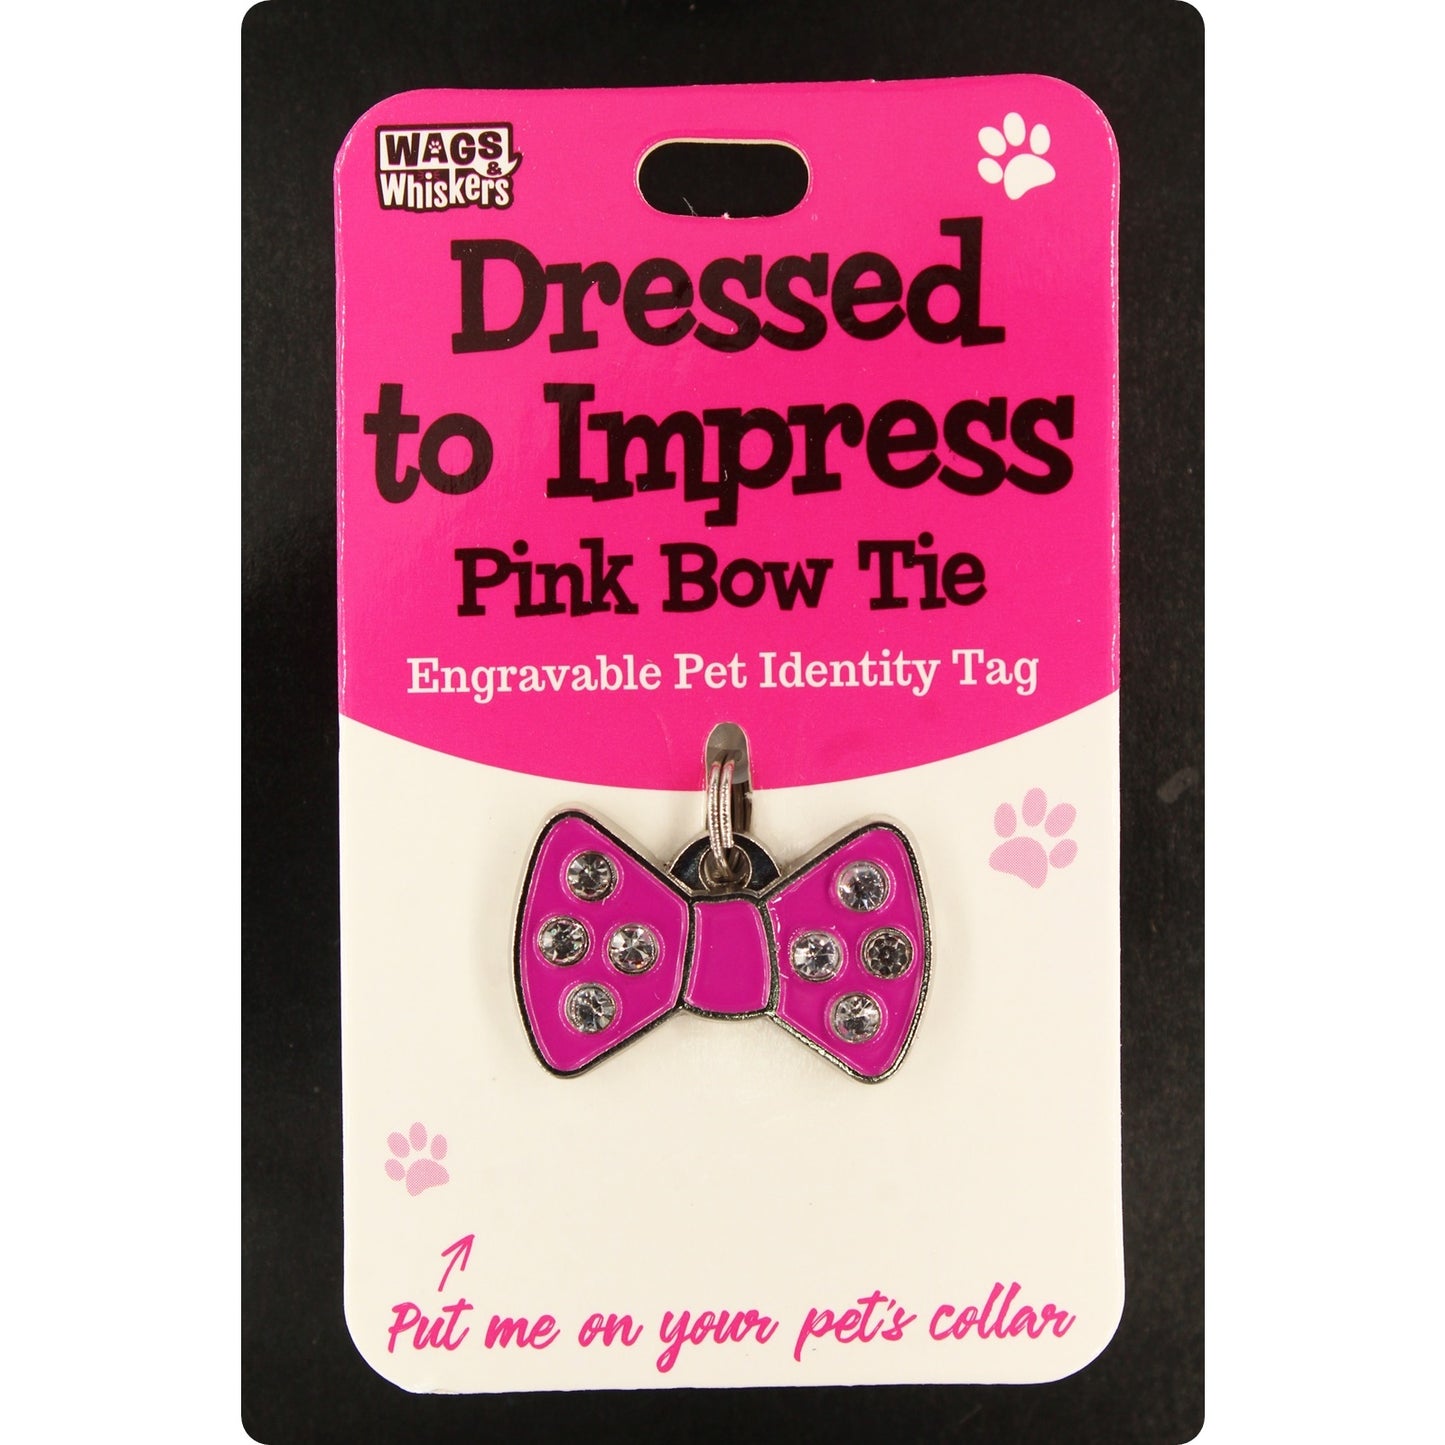 DESIRABLE GIFTS DRESSED TO IMPRESS PINK BOW WAGS & WHISKERS DOG PET TAG I CAN NOT ENGRAVE THIS ITEM